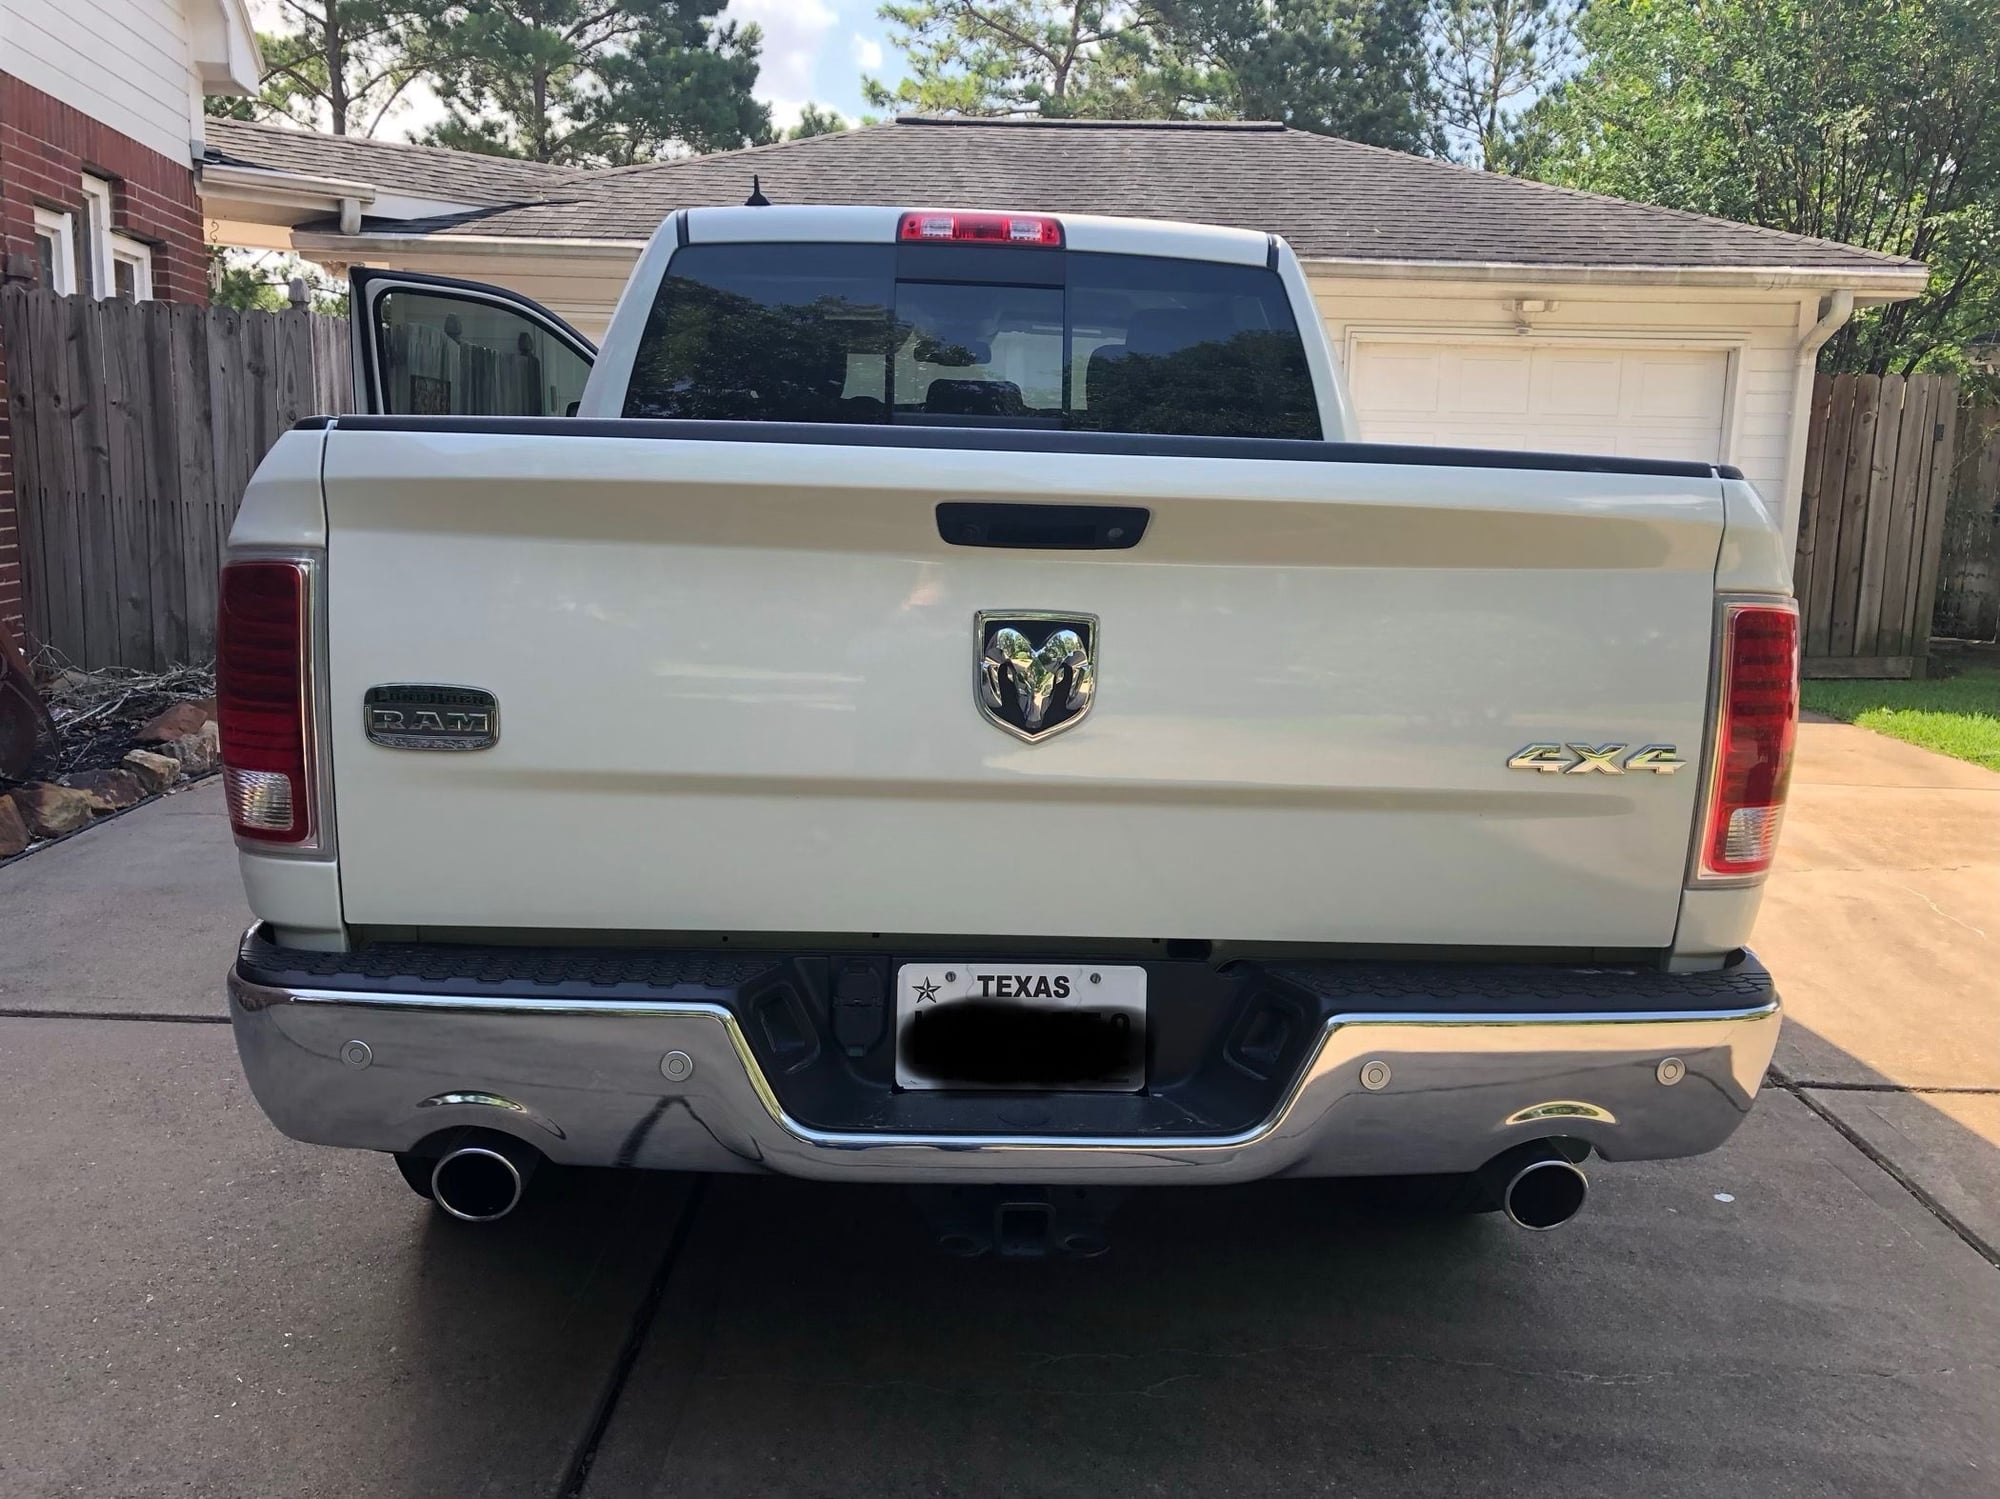 2017 Ram 1500 - 2017 Ram 1500 Longhorn 4x4, 28k miles - Used - VIN 1C6RR7PTXHS750888 - 28,000 Miles - 8 cyl - 4WD - Automatic - Truck - White - Houston, TX 77094, United States